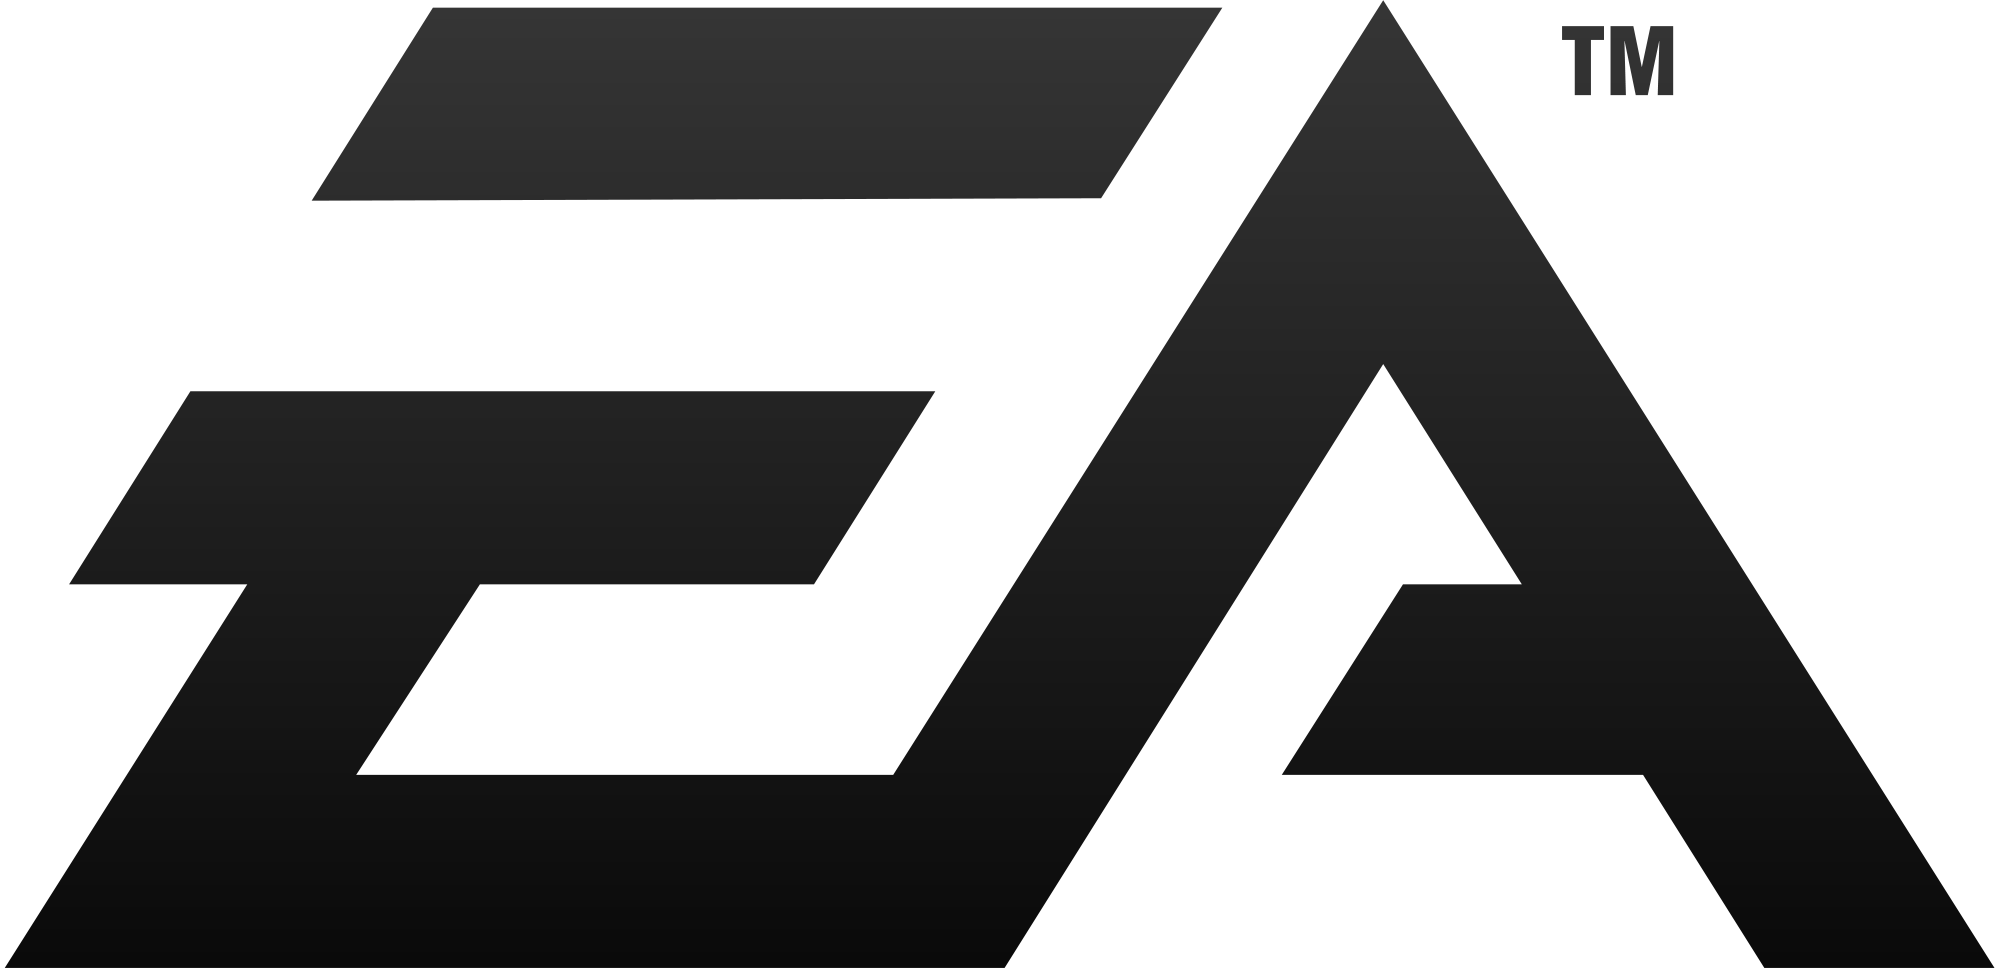 Ea games chat